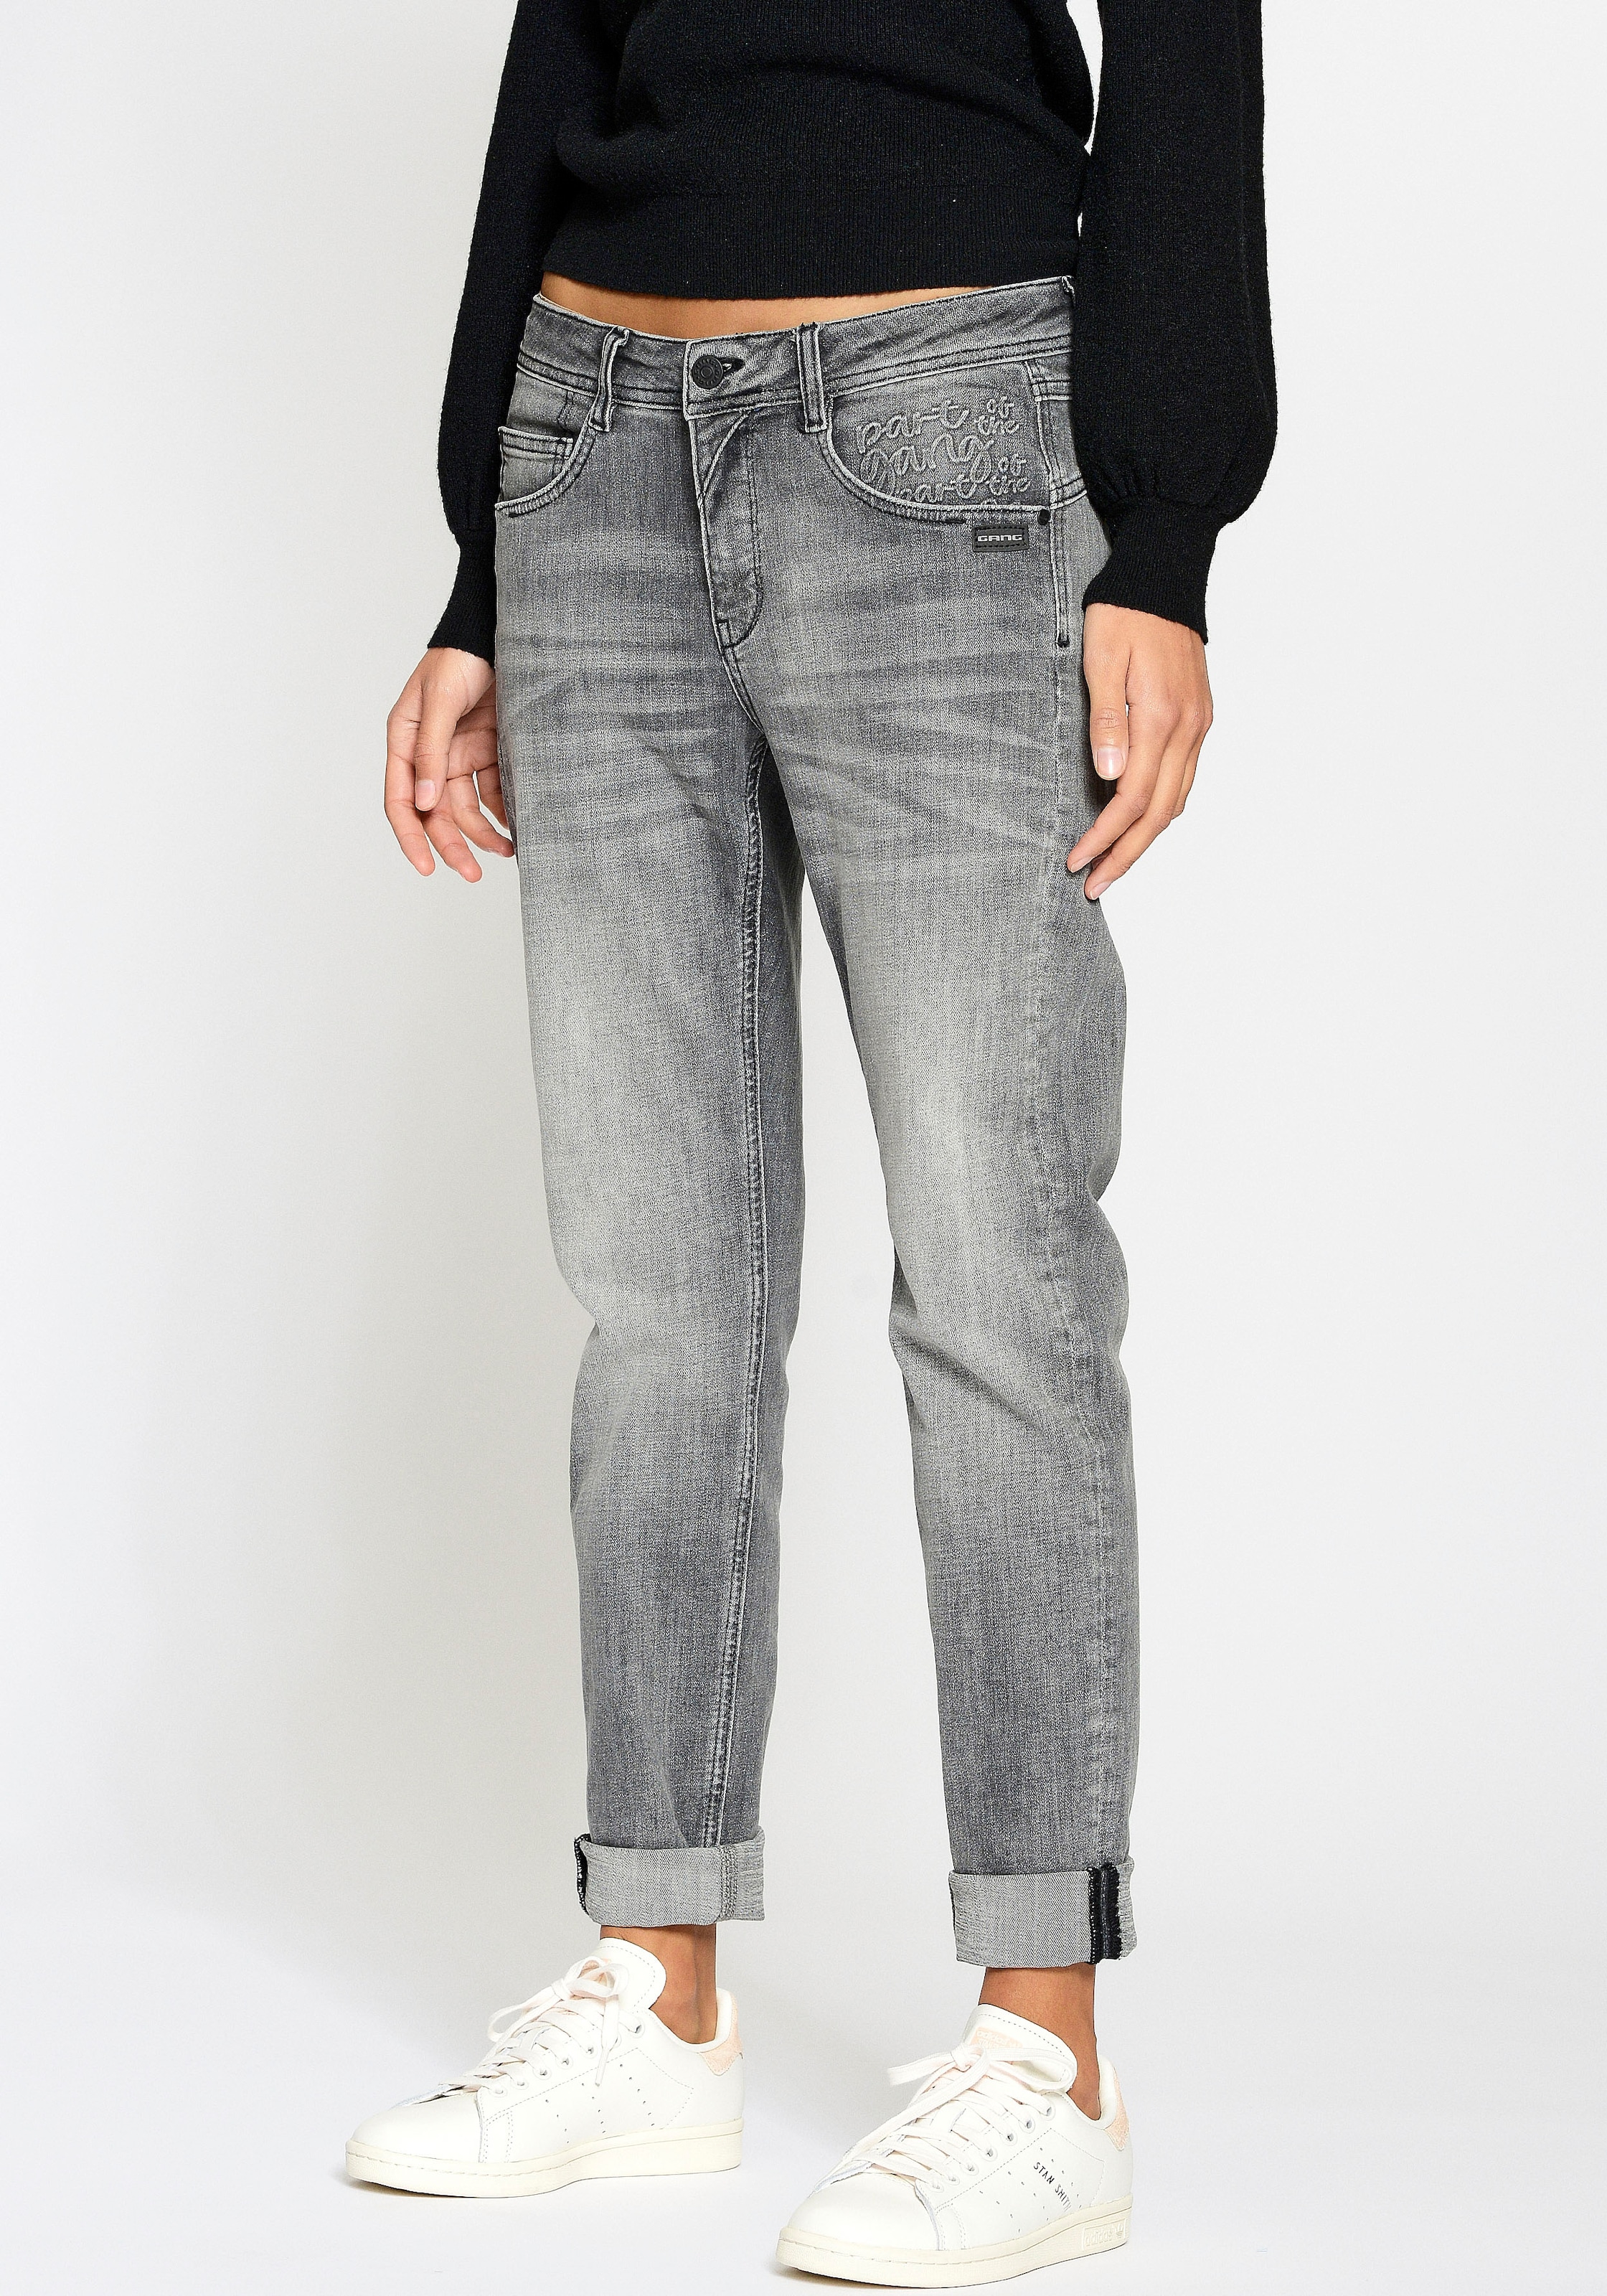 OTTO Shop GANG »94Amelie Relaxed Used-Effekten mit Online Relax-fit-Jeans Fit«, im